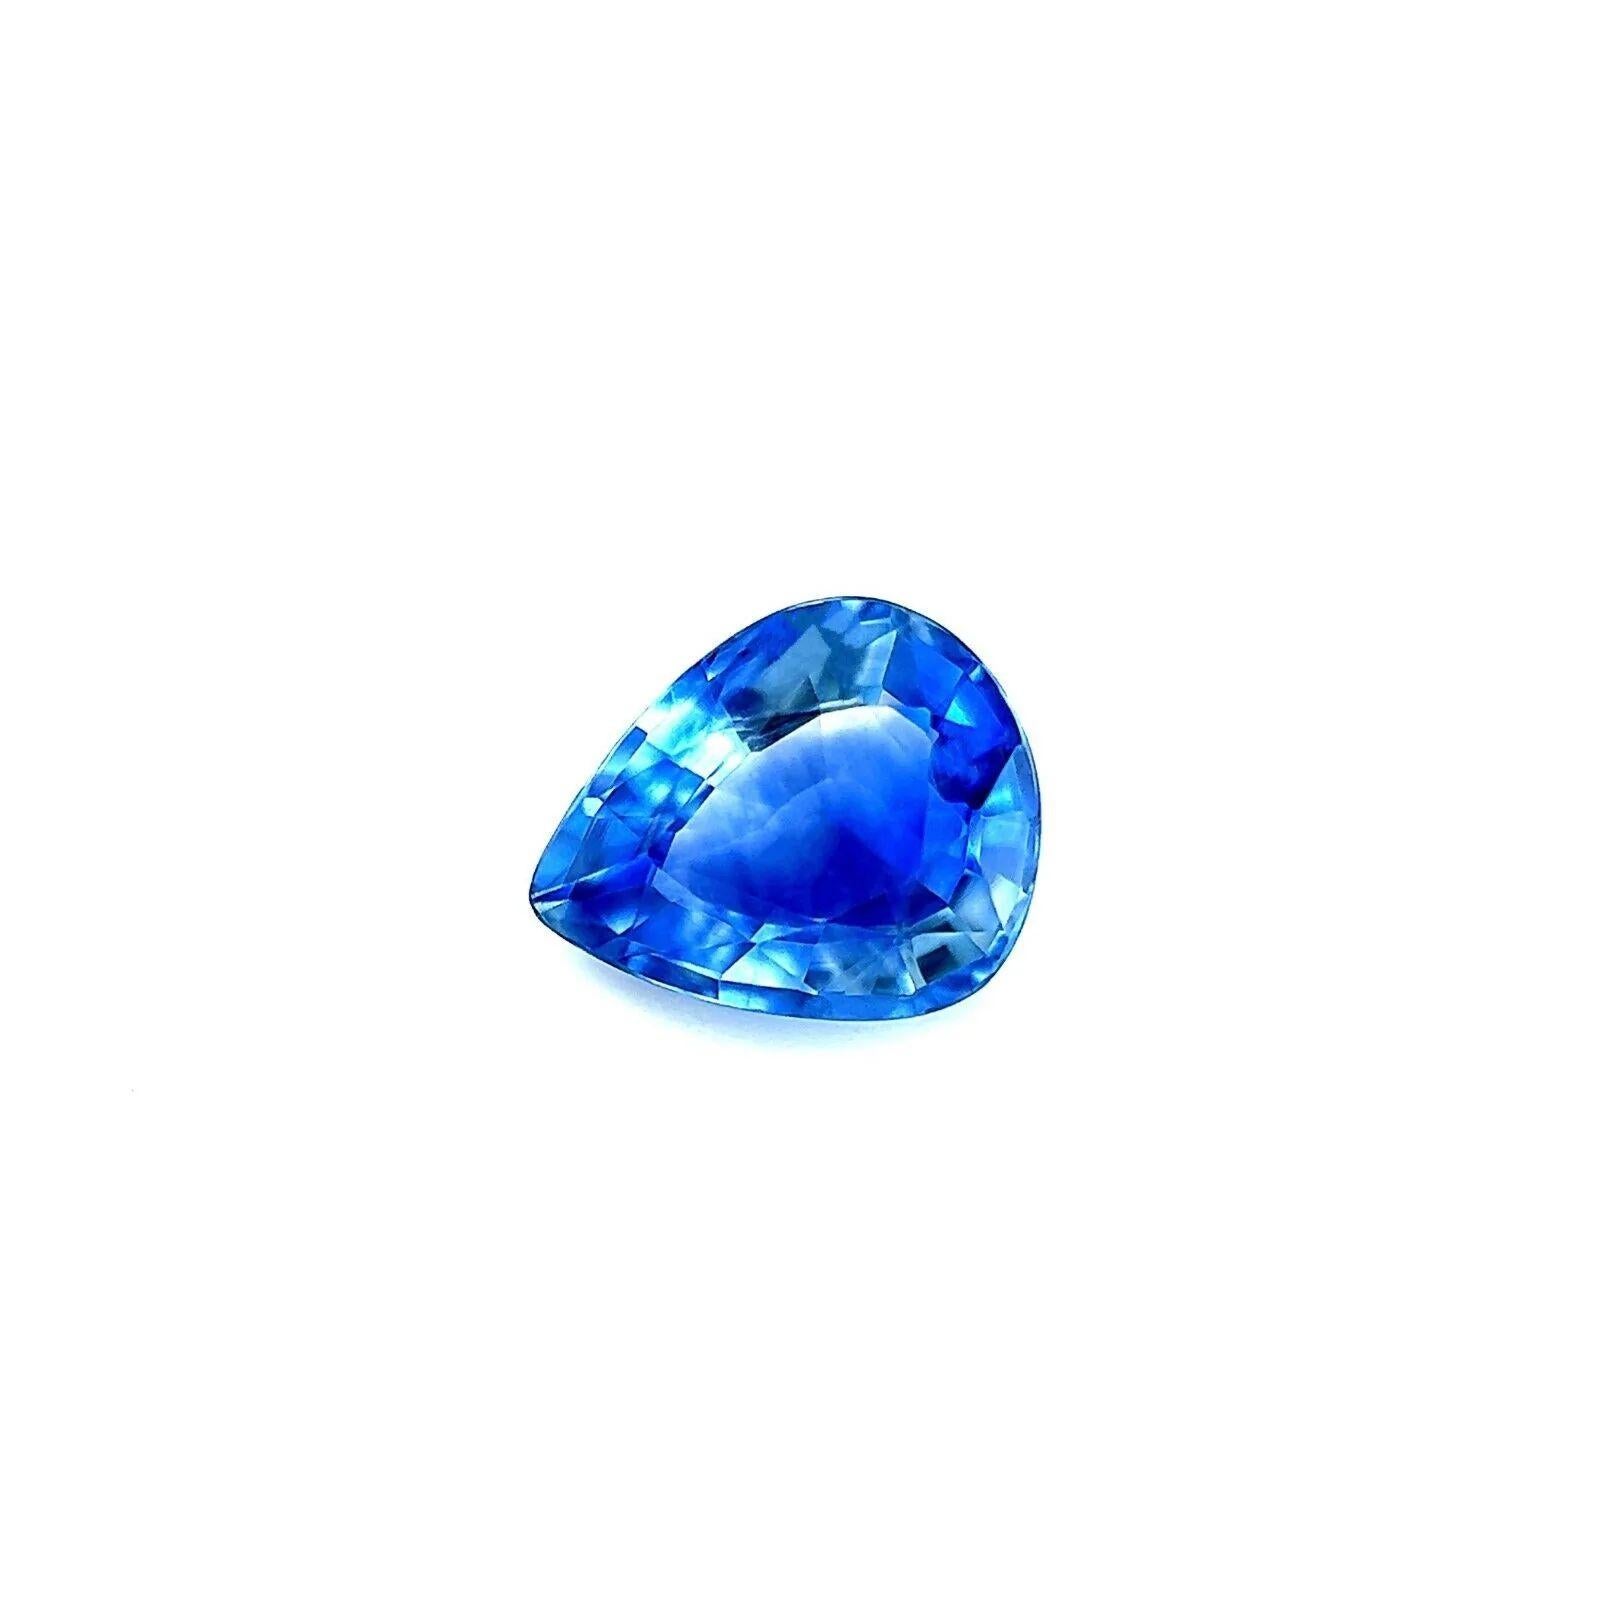 Fine 0.88ct Blue Vivid Sapphire Pear Cut Rare Loose Cut Gemstone 6.5x5.3mm

Fine Natural Vivid Blue Sapphire Gemstone.
0.88ct sapphire with a vivid blue colour and excellent clarity, very clean stone.
Also has an excellent pear teardrop